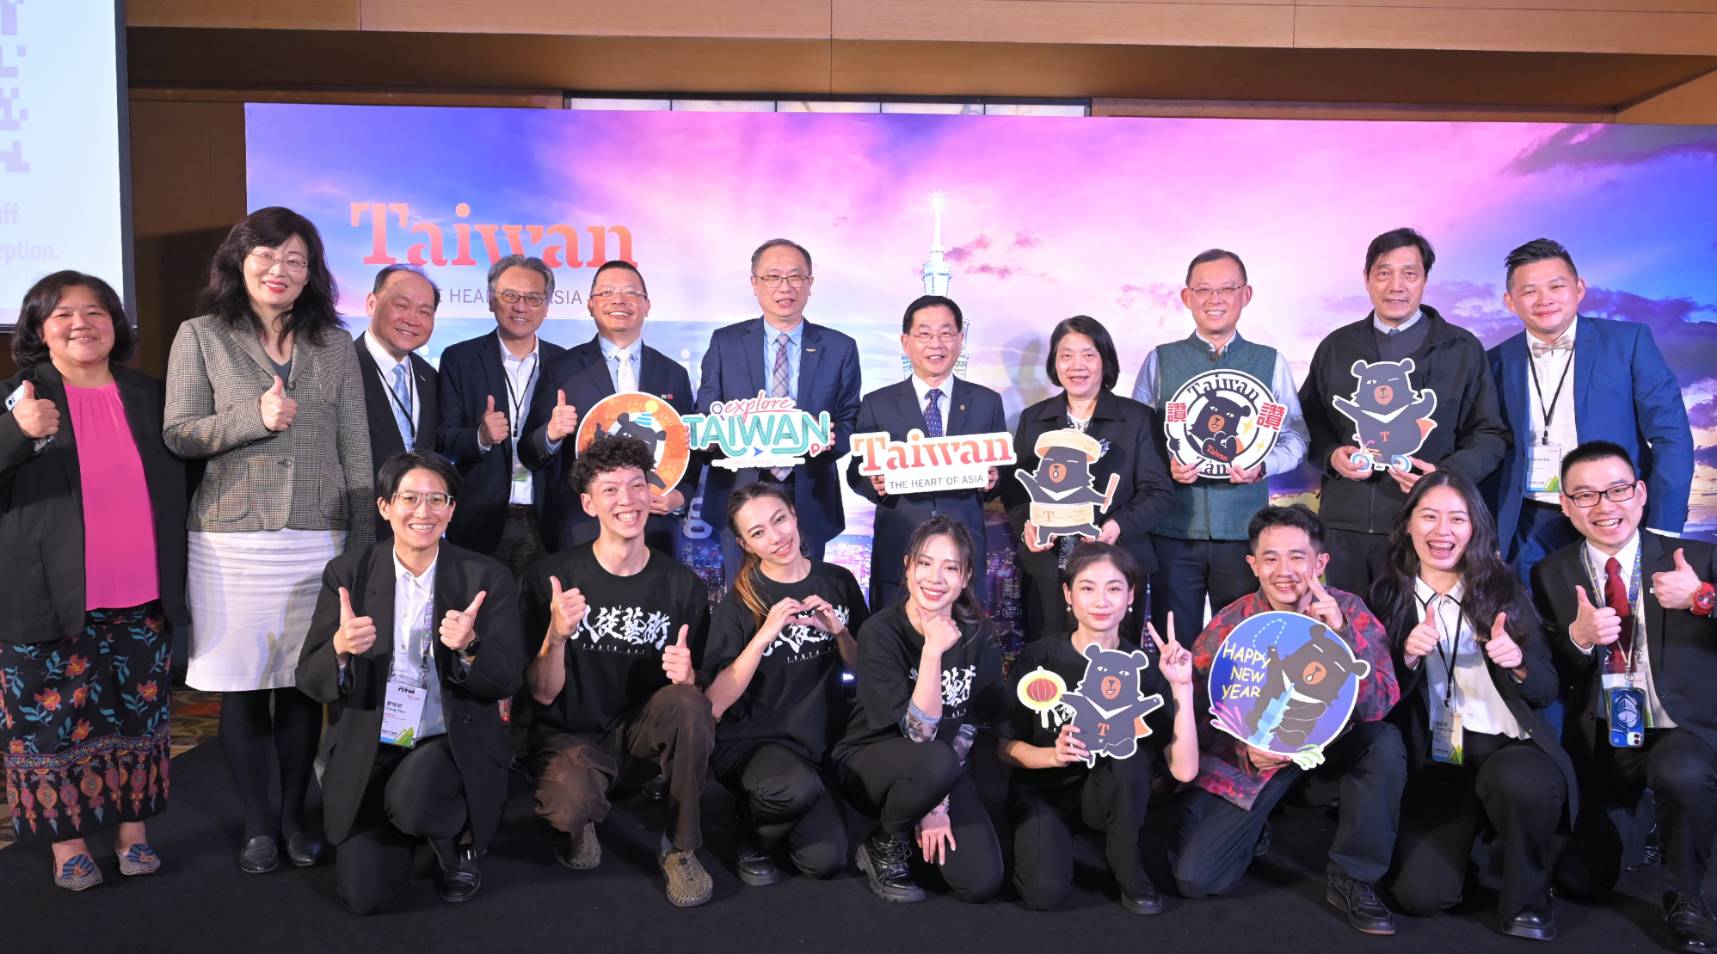 Taiwan returns to India with Tourism Information Centre in Mumbai